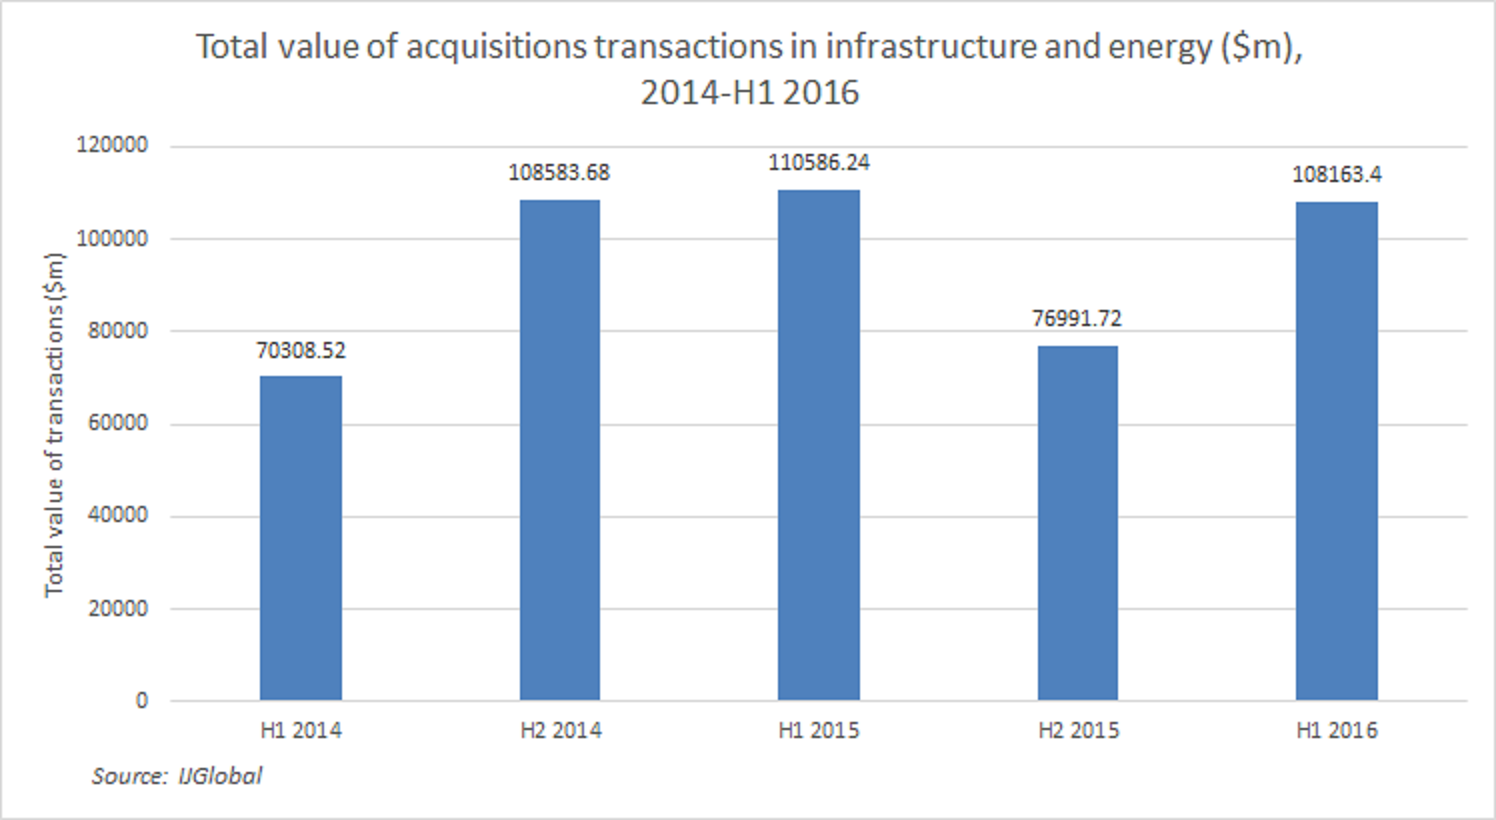 Global M&A infra and energy transaction volumes 2014 to H1 2016